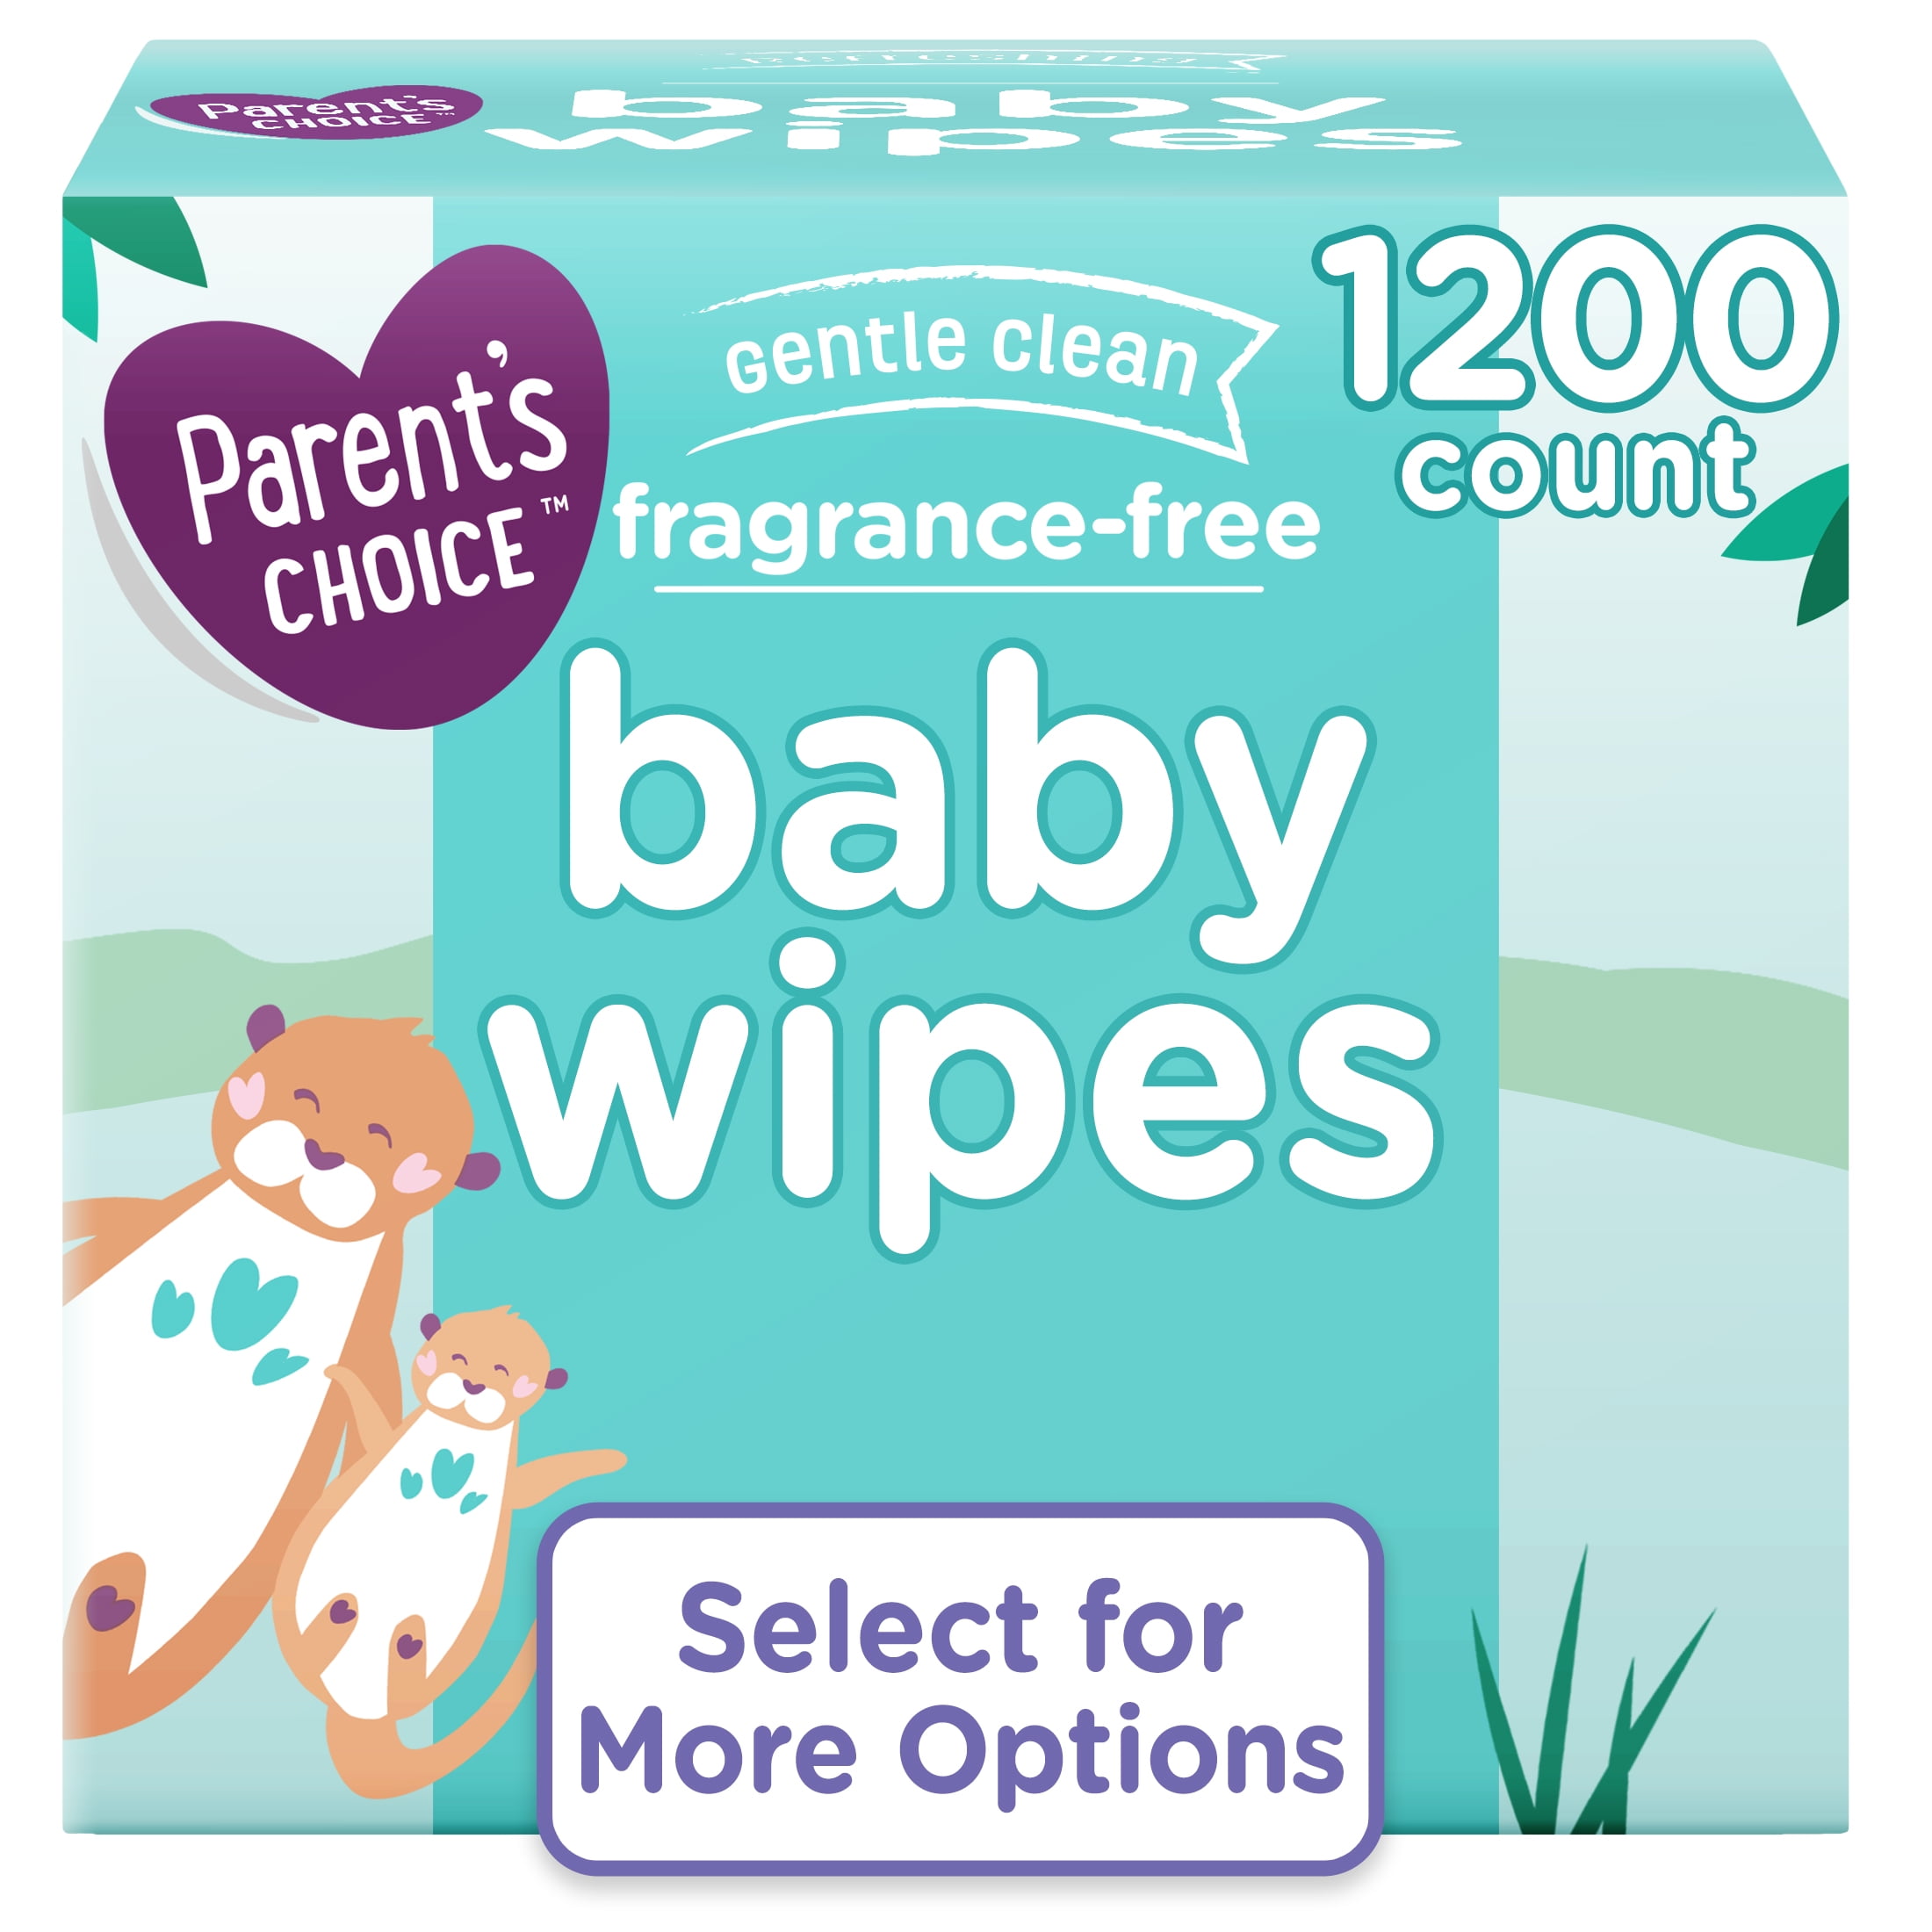 Parents Choice Fragrance-Free Baby Wipes, 1200 Count (Select for More Options)